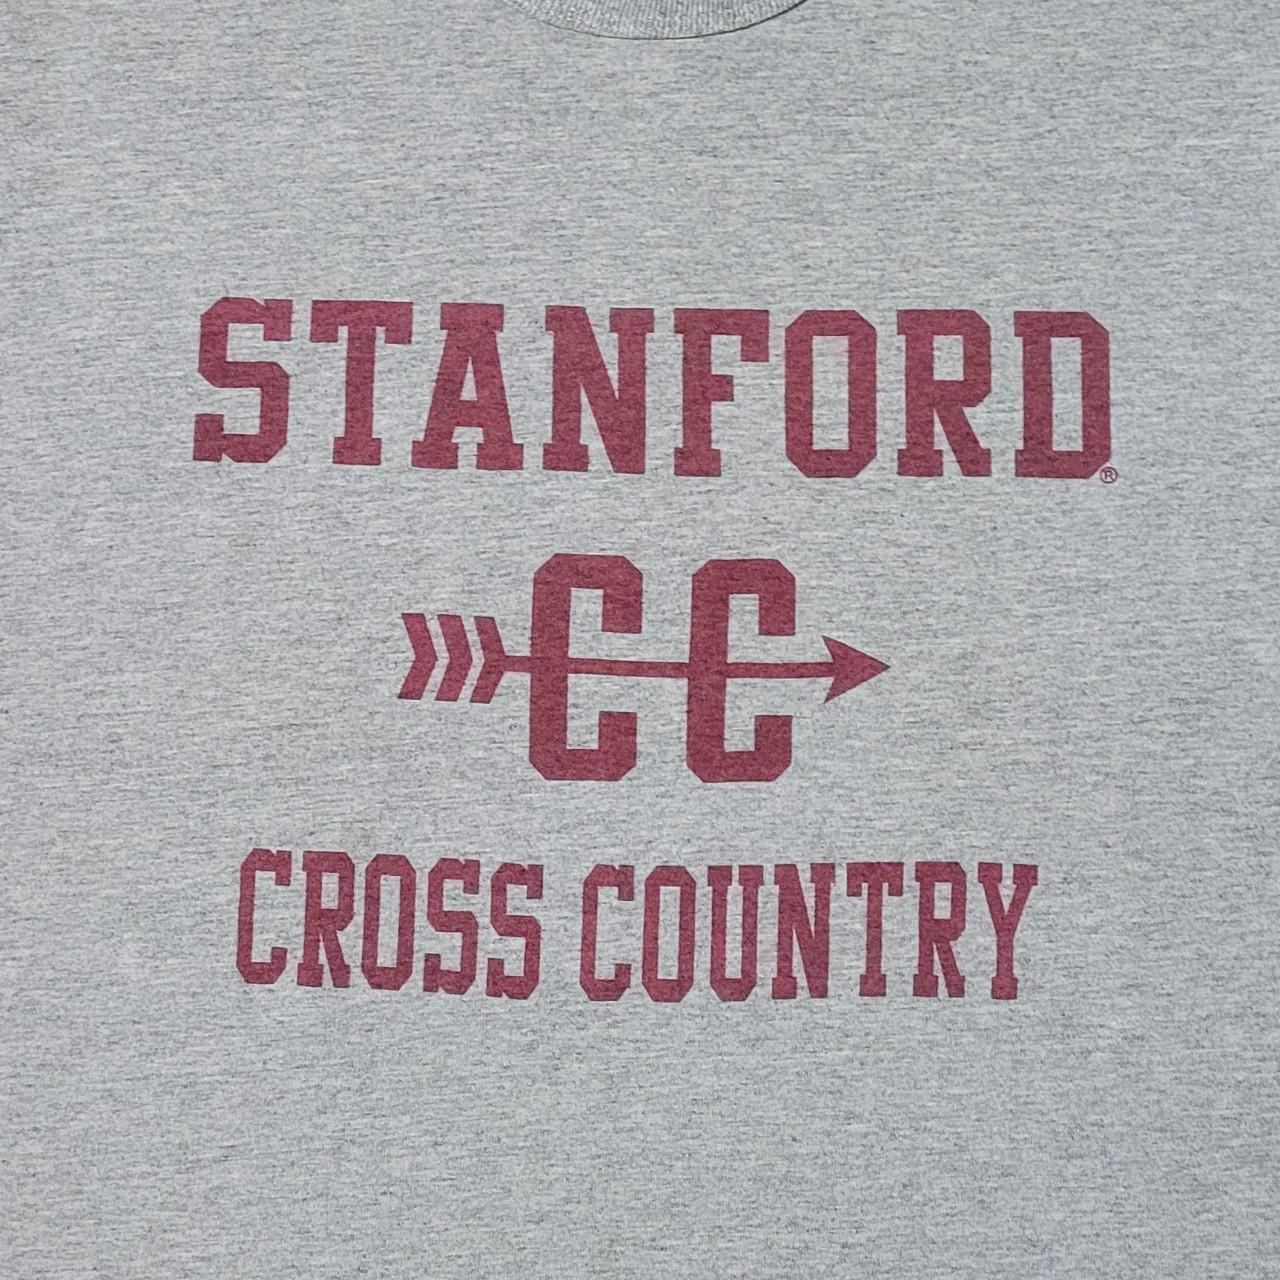 Product Image 2 - Stanford cross country collegiate t-shirt.